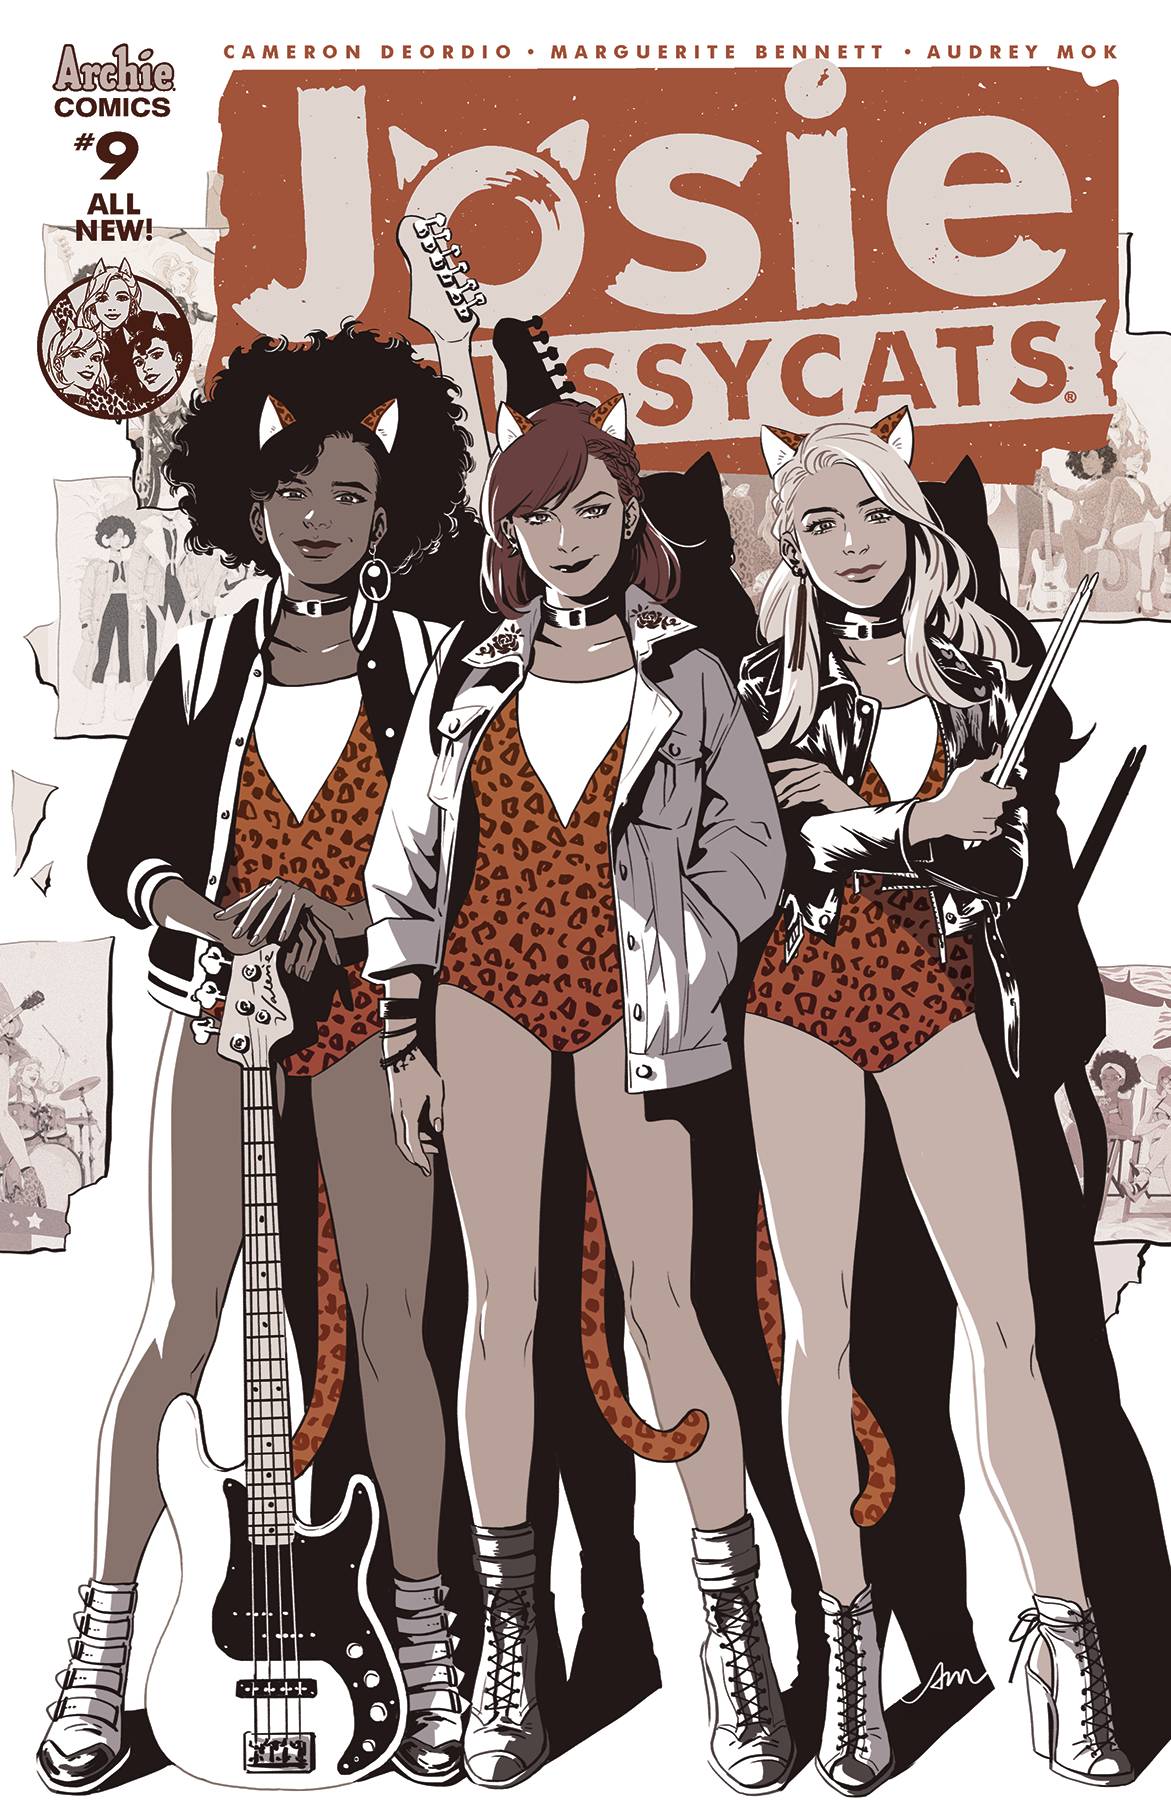 JOSIE AND THE PUSSYCATS#9